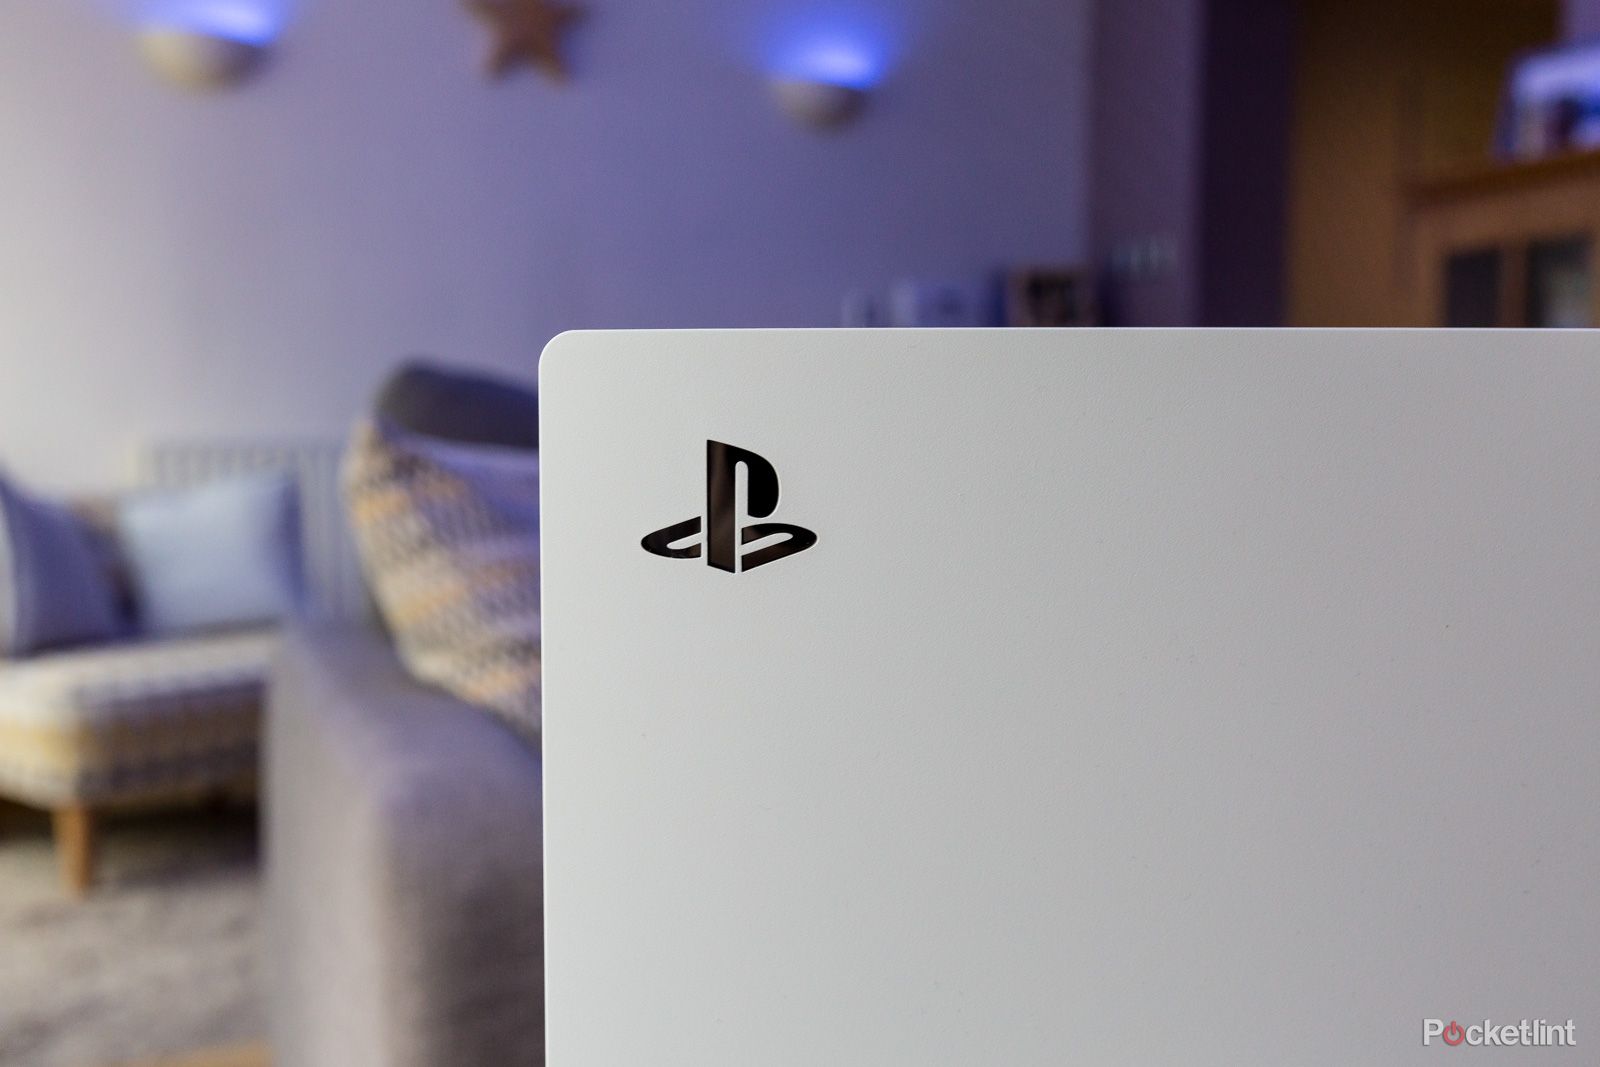 PSN name change: How it works, what to expect when changing PS4